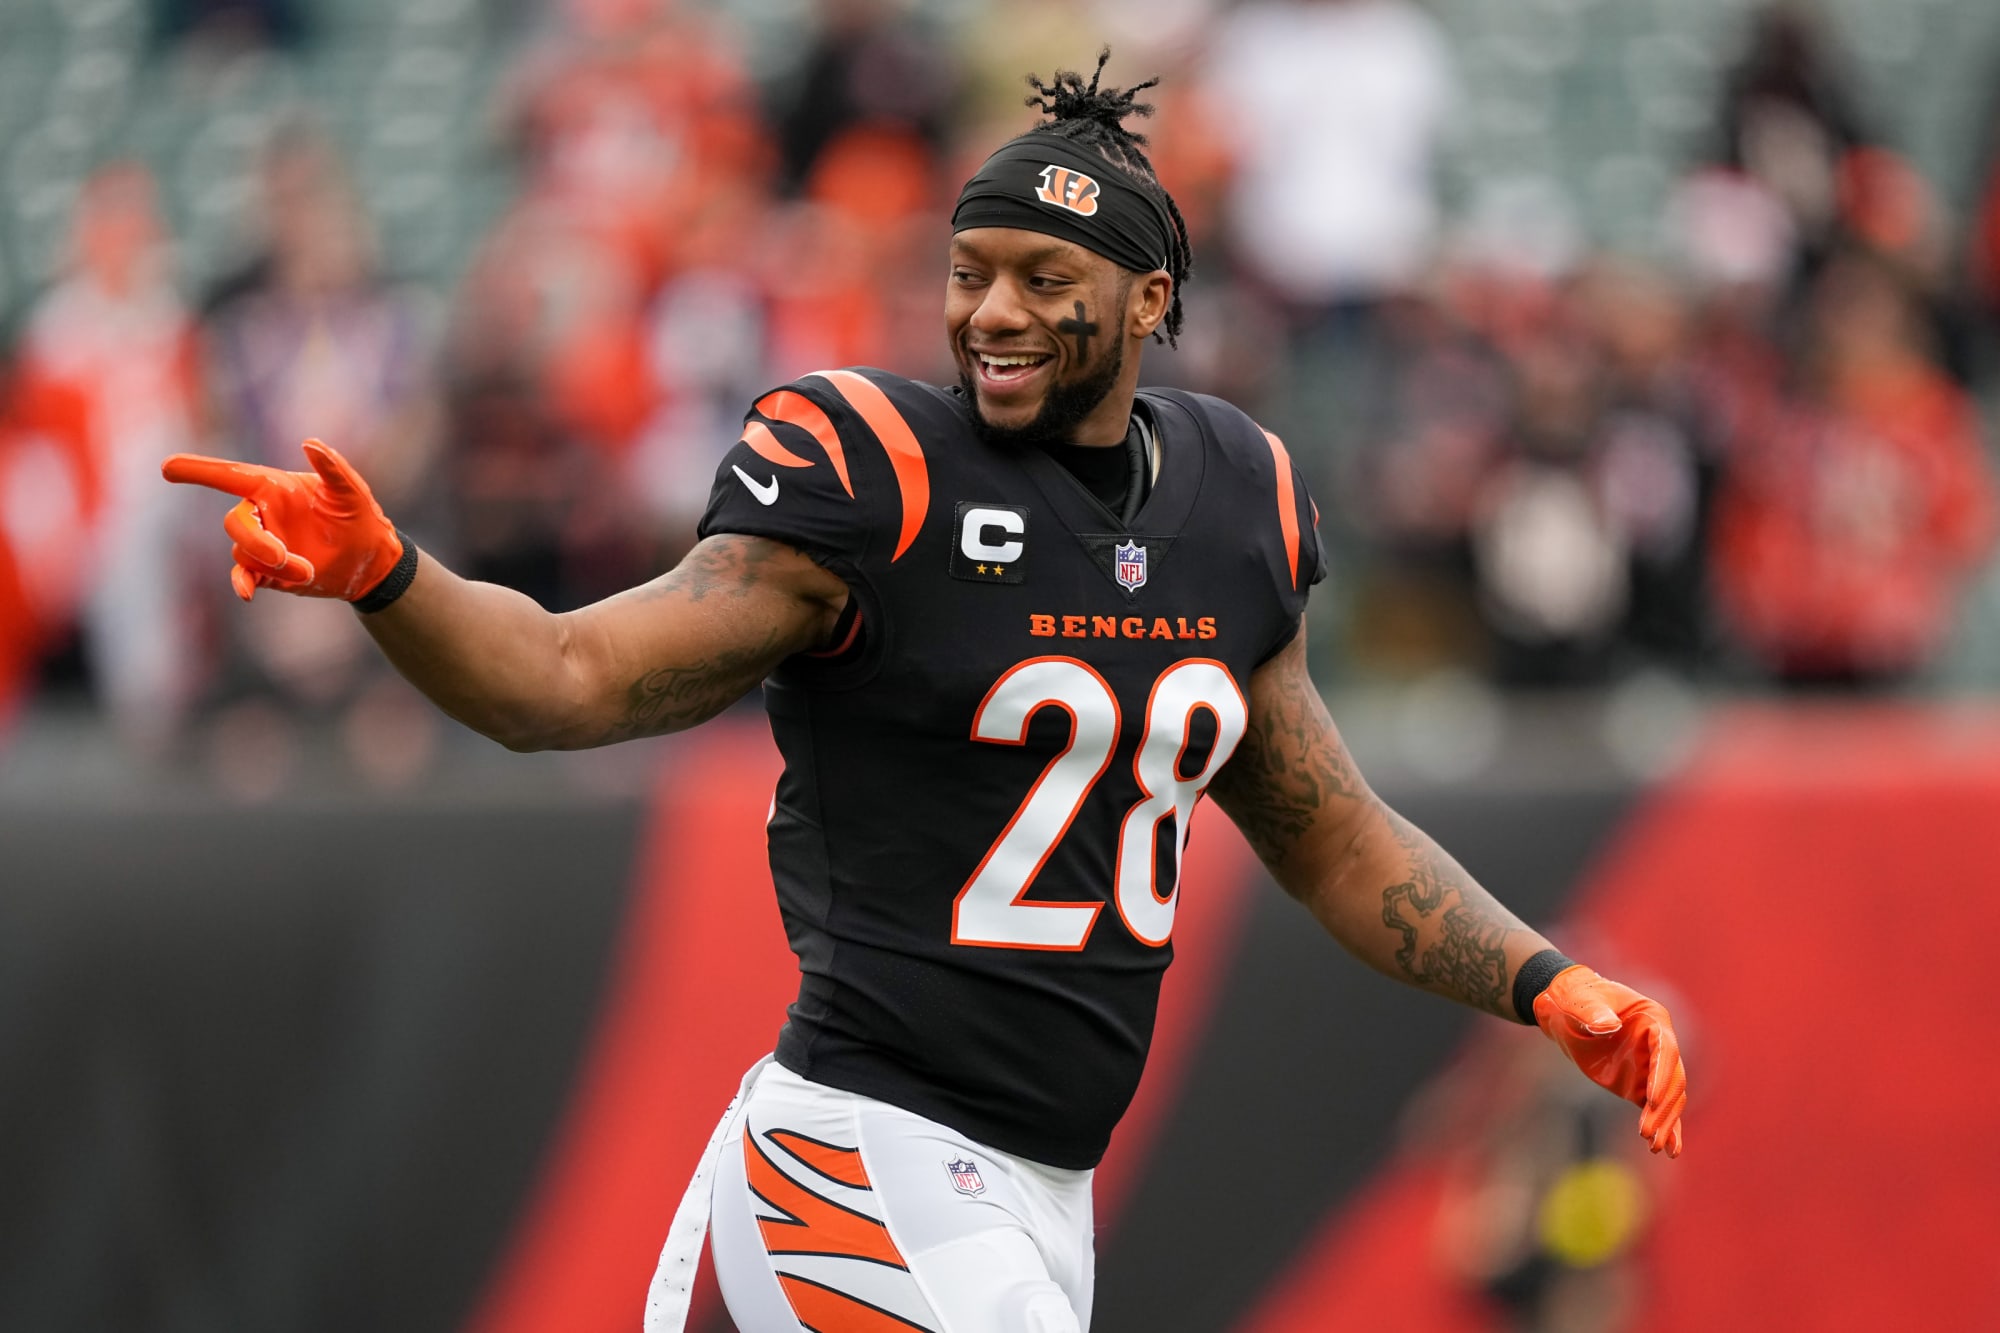 Bengals’ Joe Mixon back in hot water after refiled misdemeanor charge